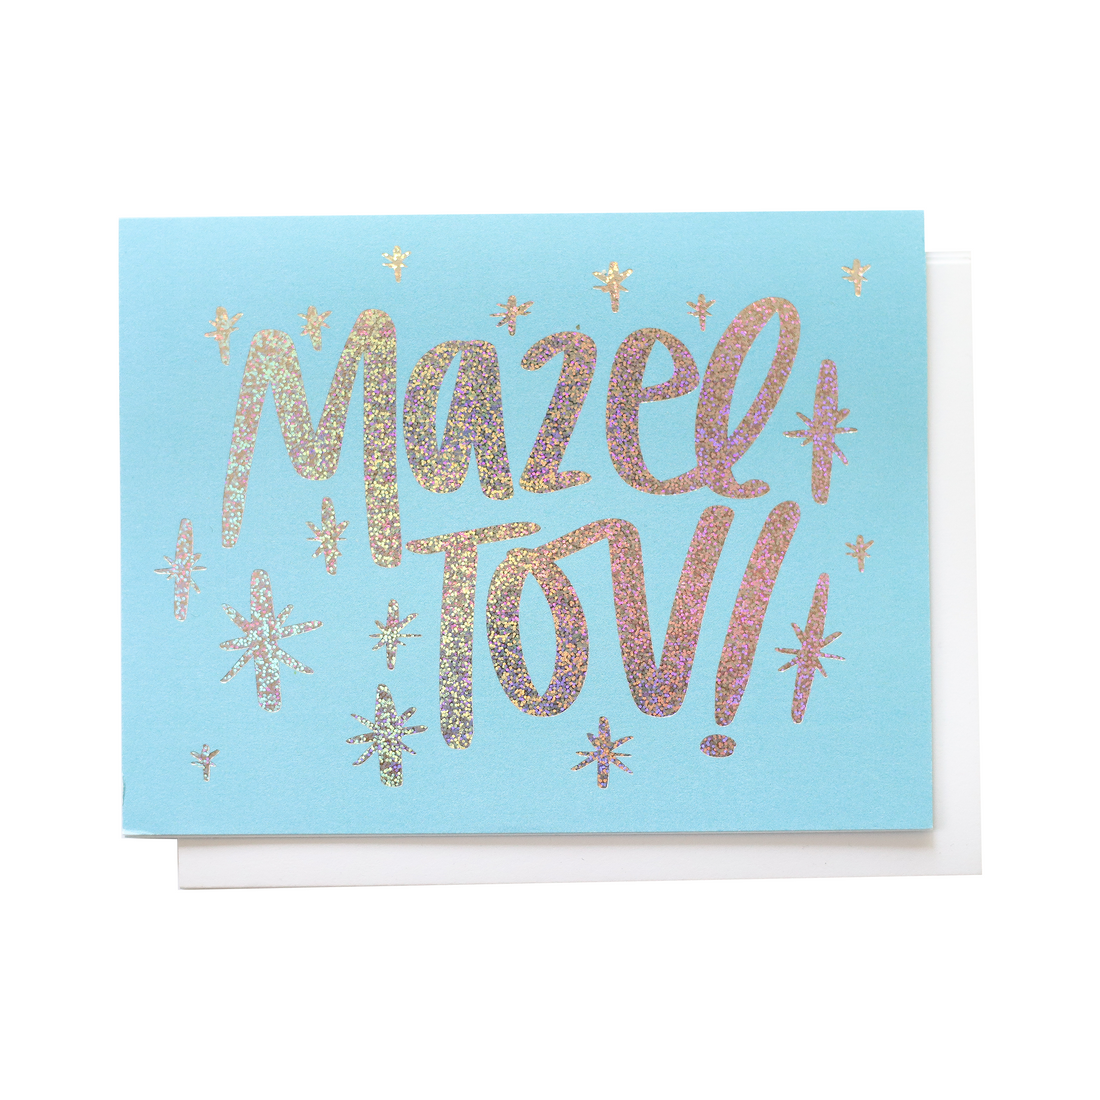 The Penny Paper Co. Cards - Mazel Tov!